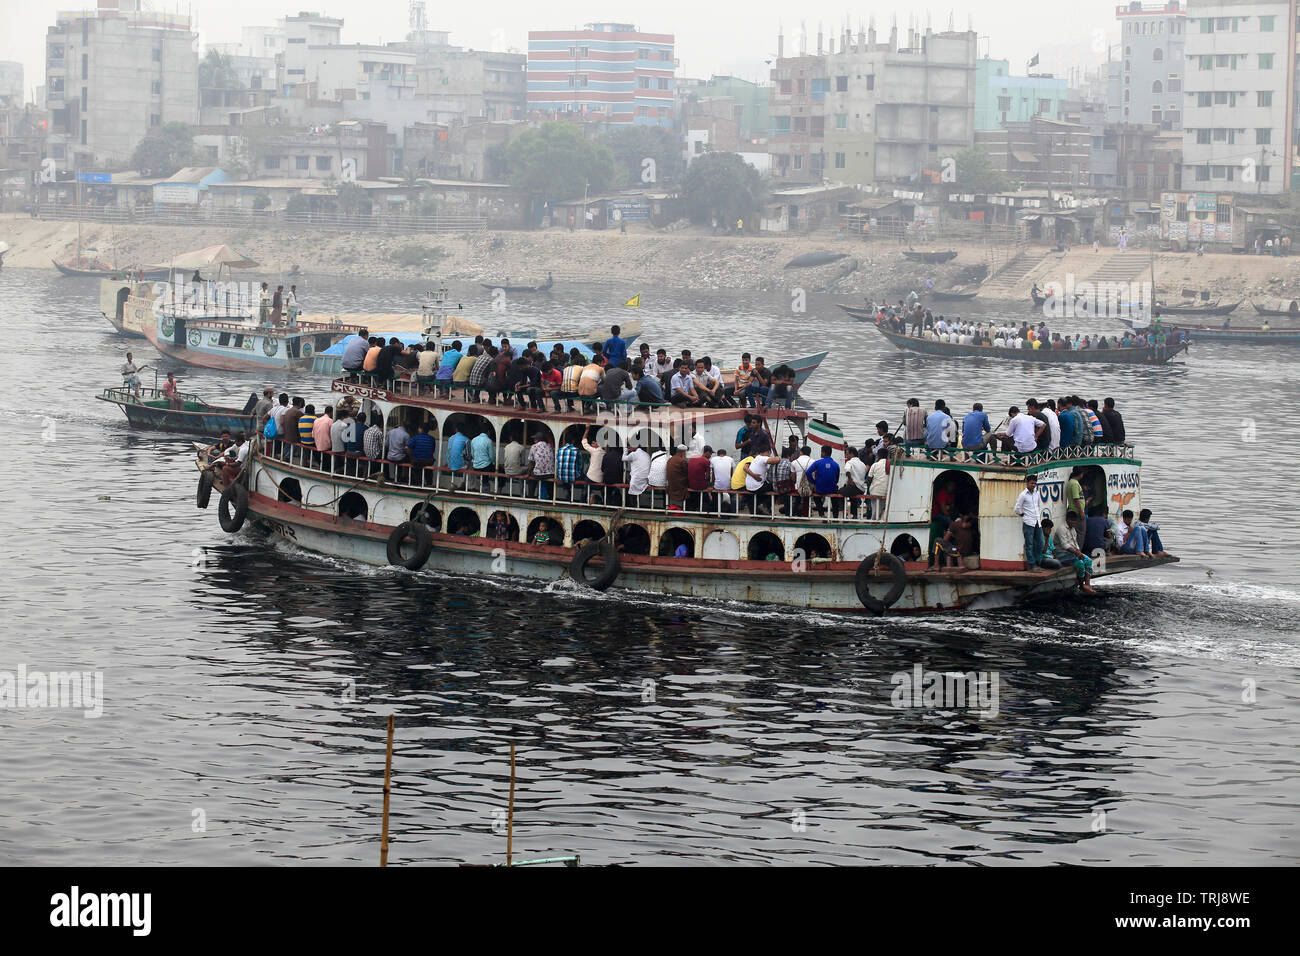 People cross the slimy waters of the polluted Buriganga River every day to reach their destinations. Dhaka, Bangladesh. Stock Photo